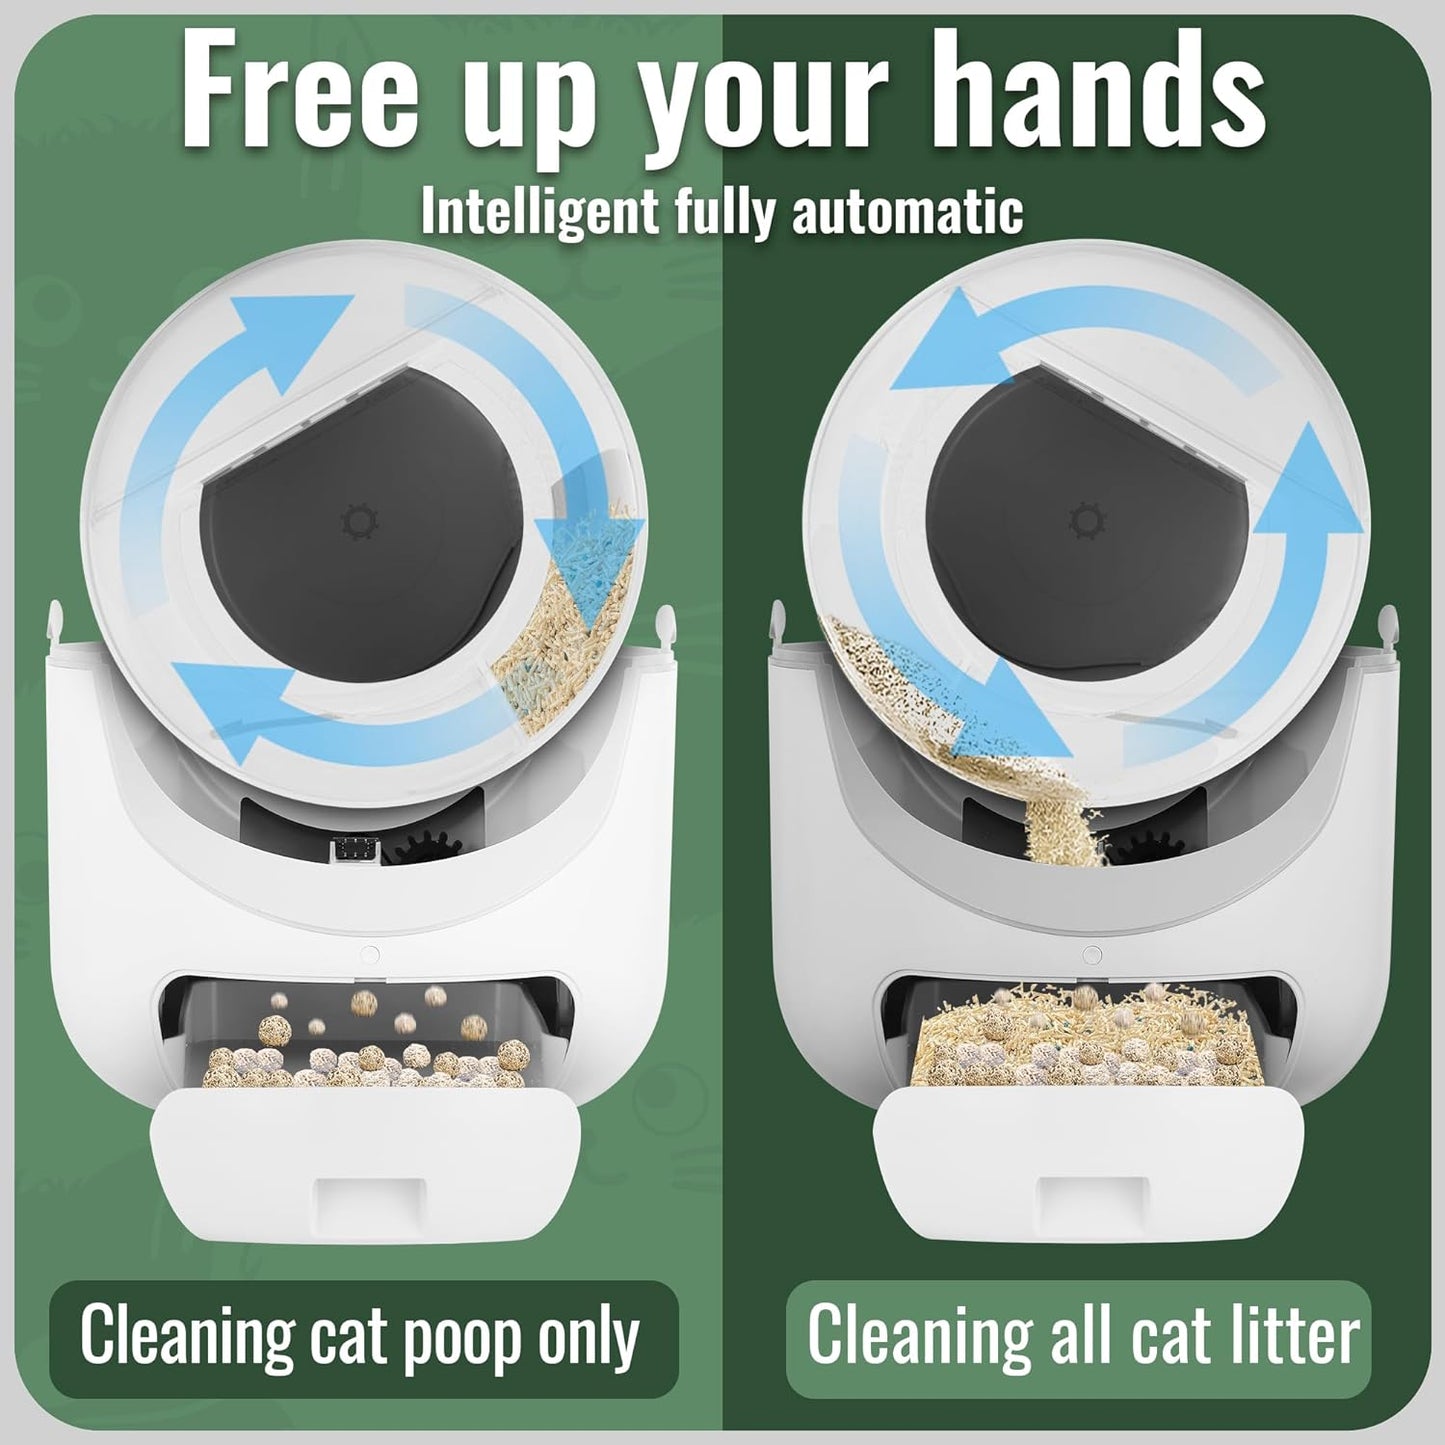 MEEGEEM Self Cleaning Cat Litter Box - 85L Extra Large Automatic Cat Litter Box Self Cleaning for Multiple Cats, Anti-Pinch/Odor-Removal Design, All Litter Can Use, with Garbage Bags/Mats0223